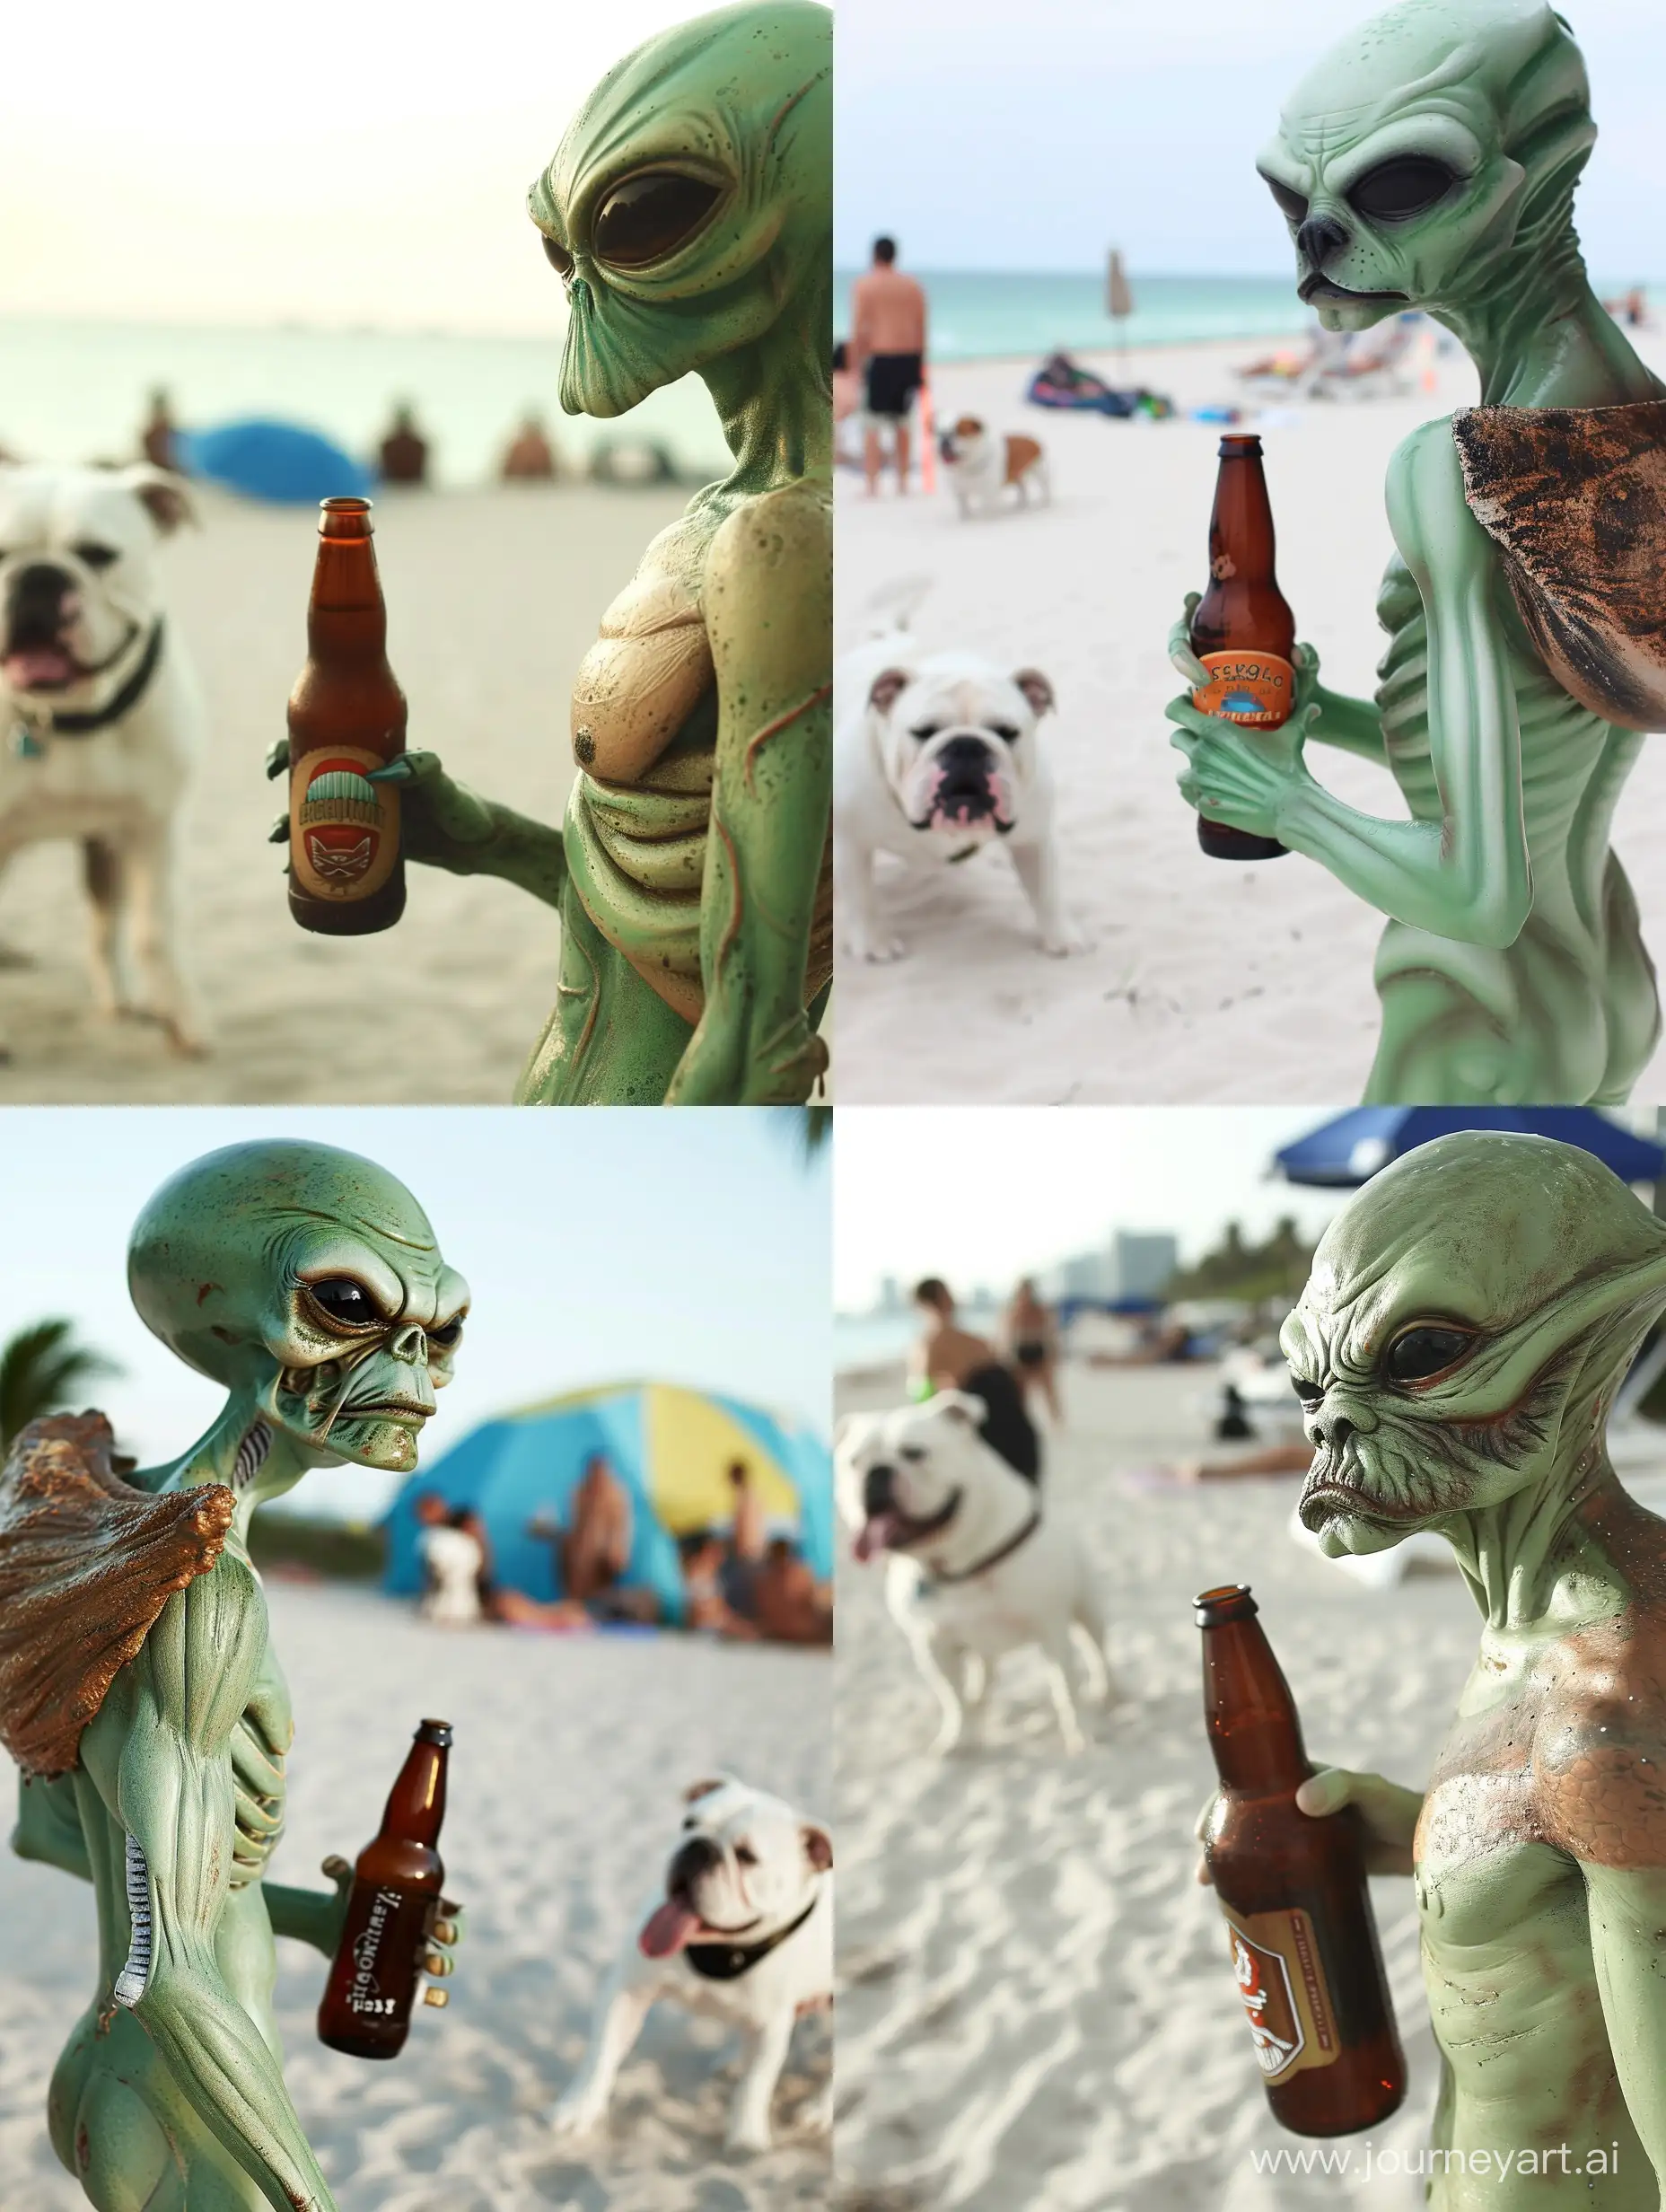 Extraterrestrial-Alien-with-Unique-Appearance-Enjoying-Beer-on-Miami-Beach-with-Bulldog-Companion